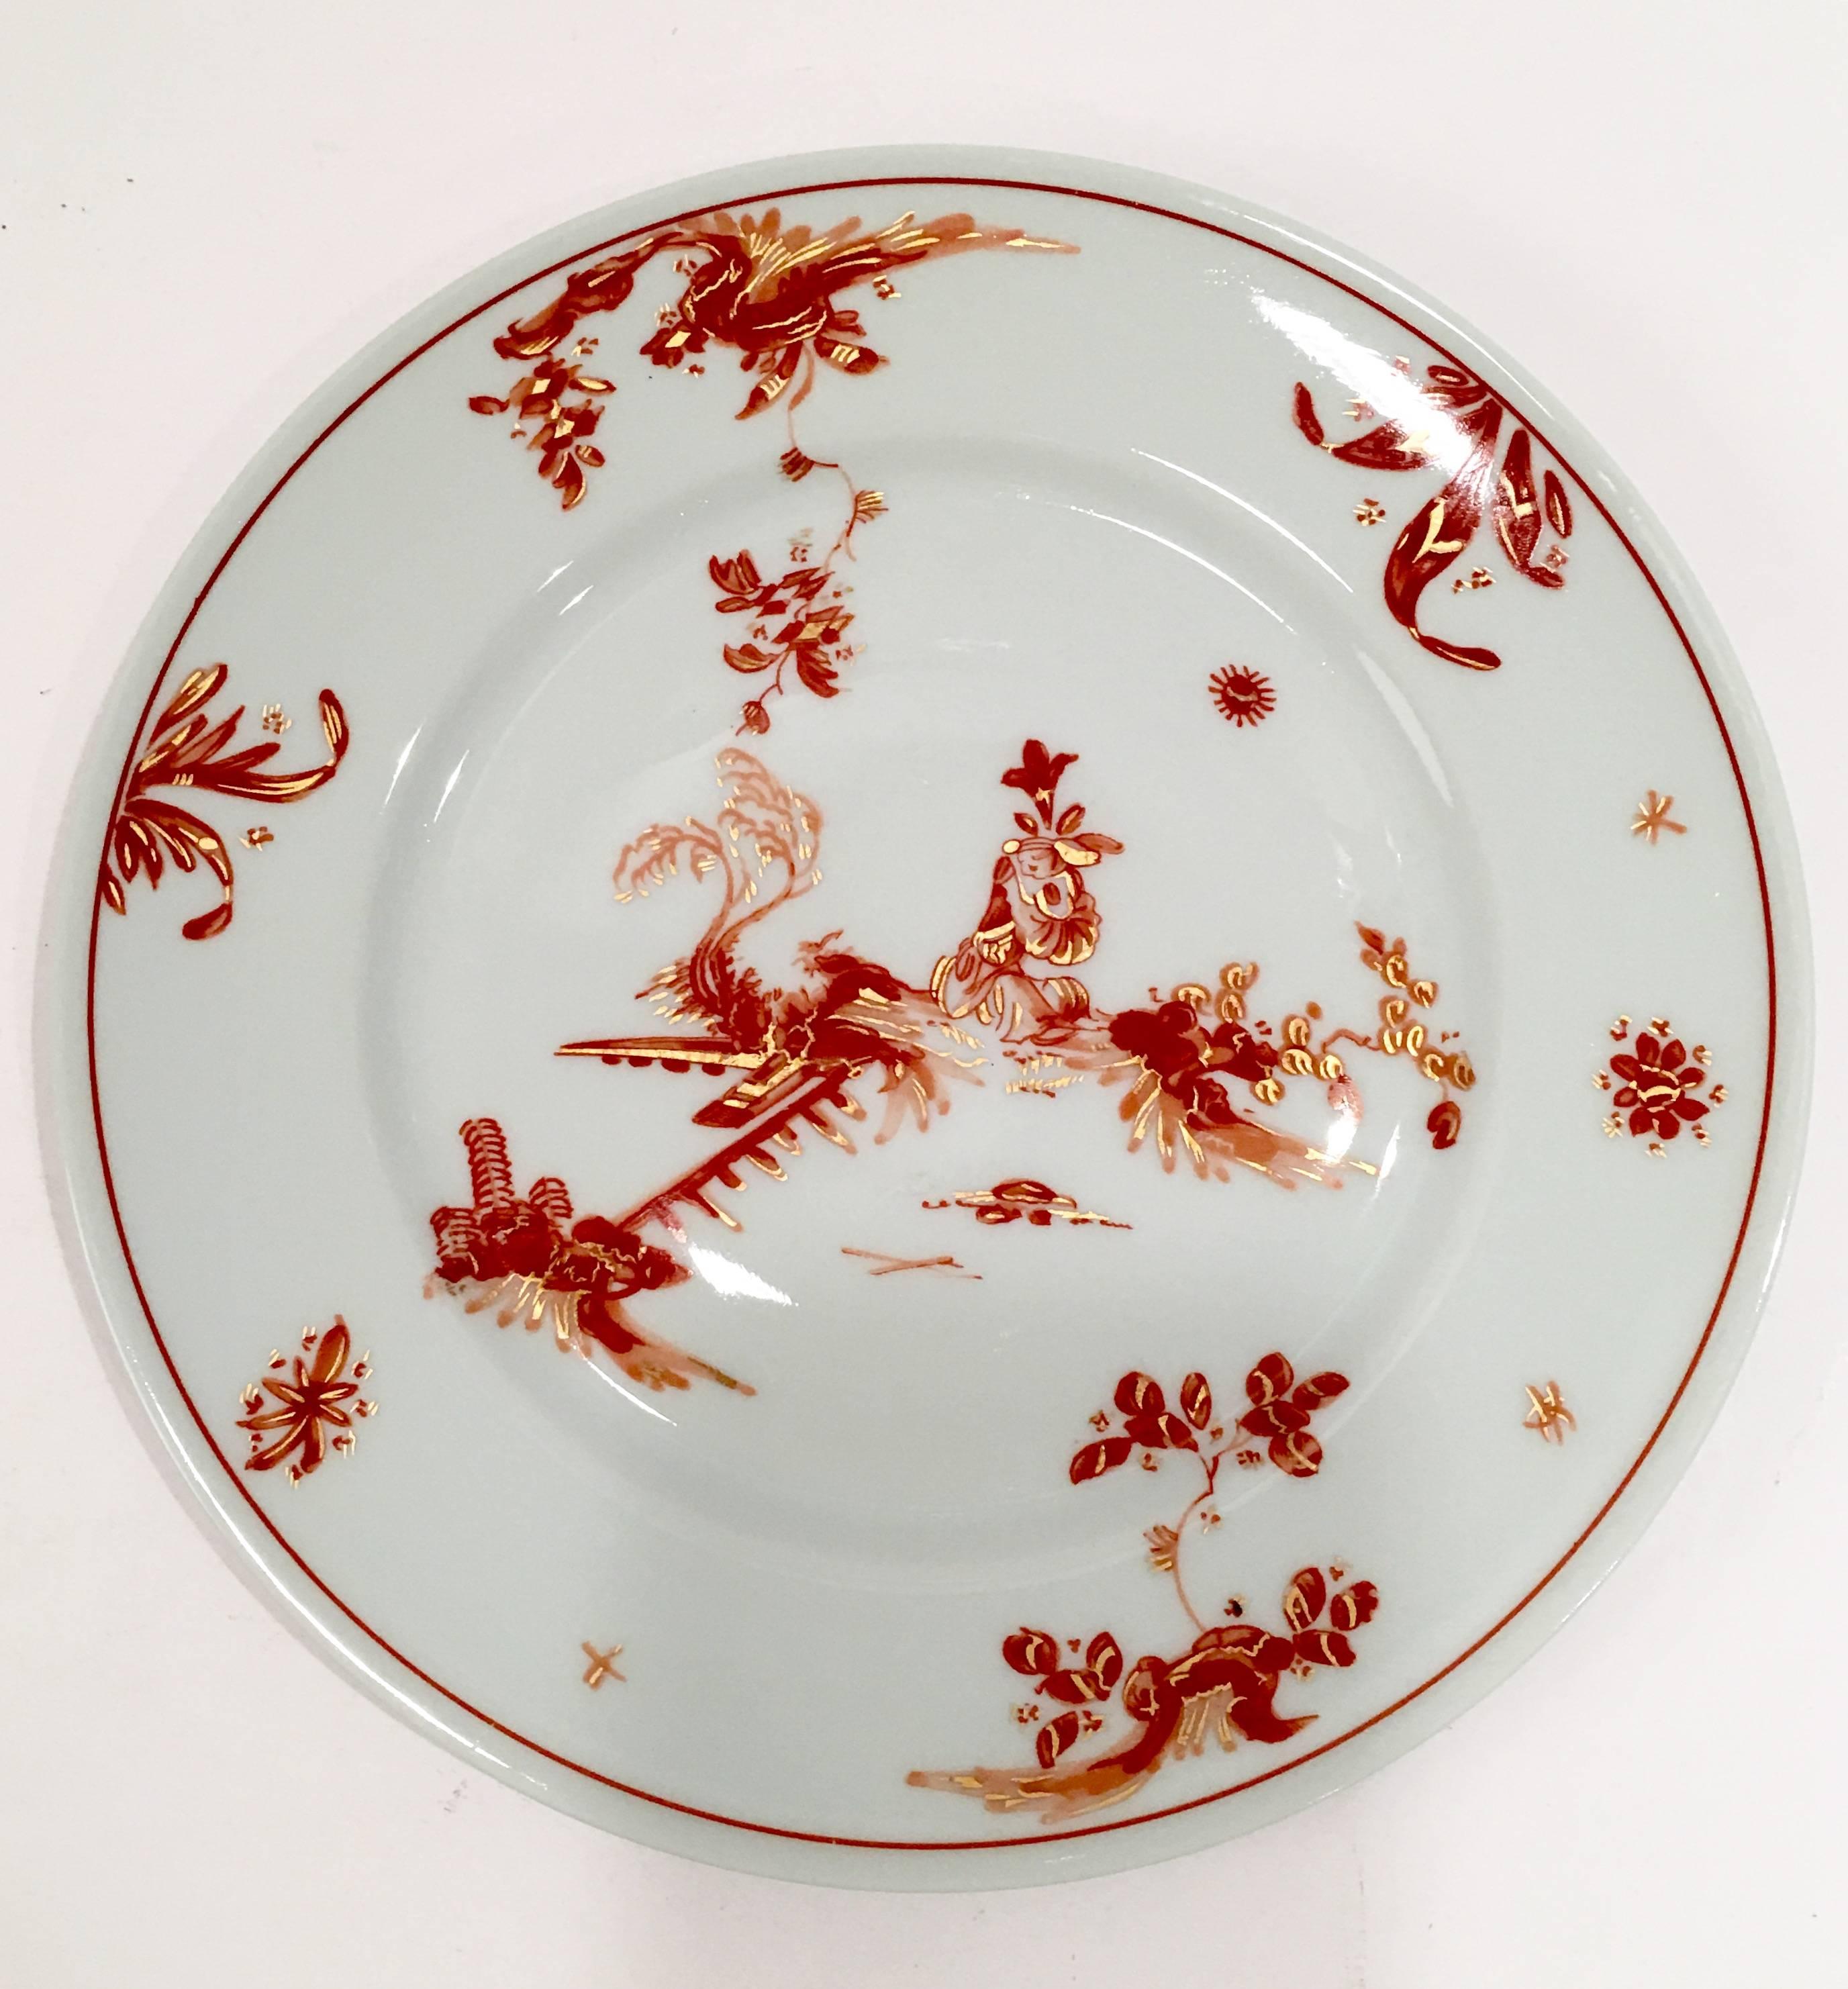 Elegant chinoiserie style porcelain plates in rust. Red and gold on top of a white ground in a floral and fauna pattern with 22-karat gold embossed detail. Each plate is signed on the underside.